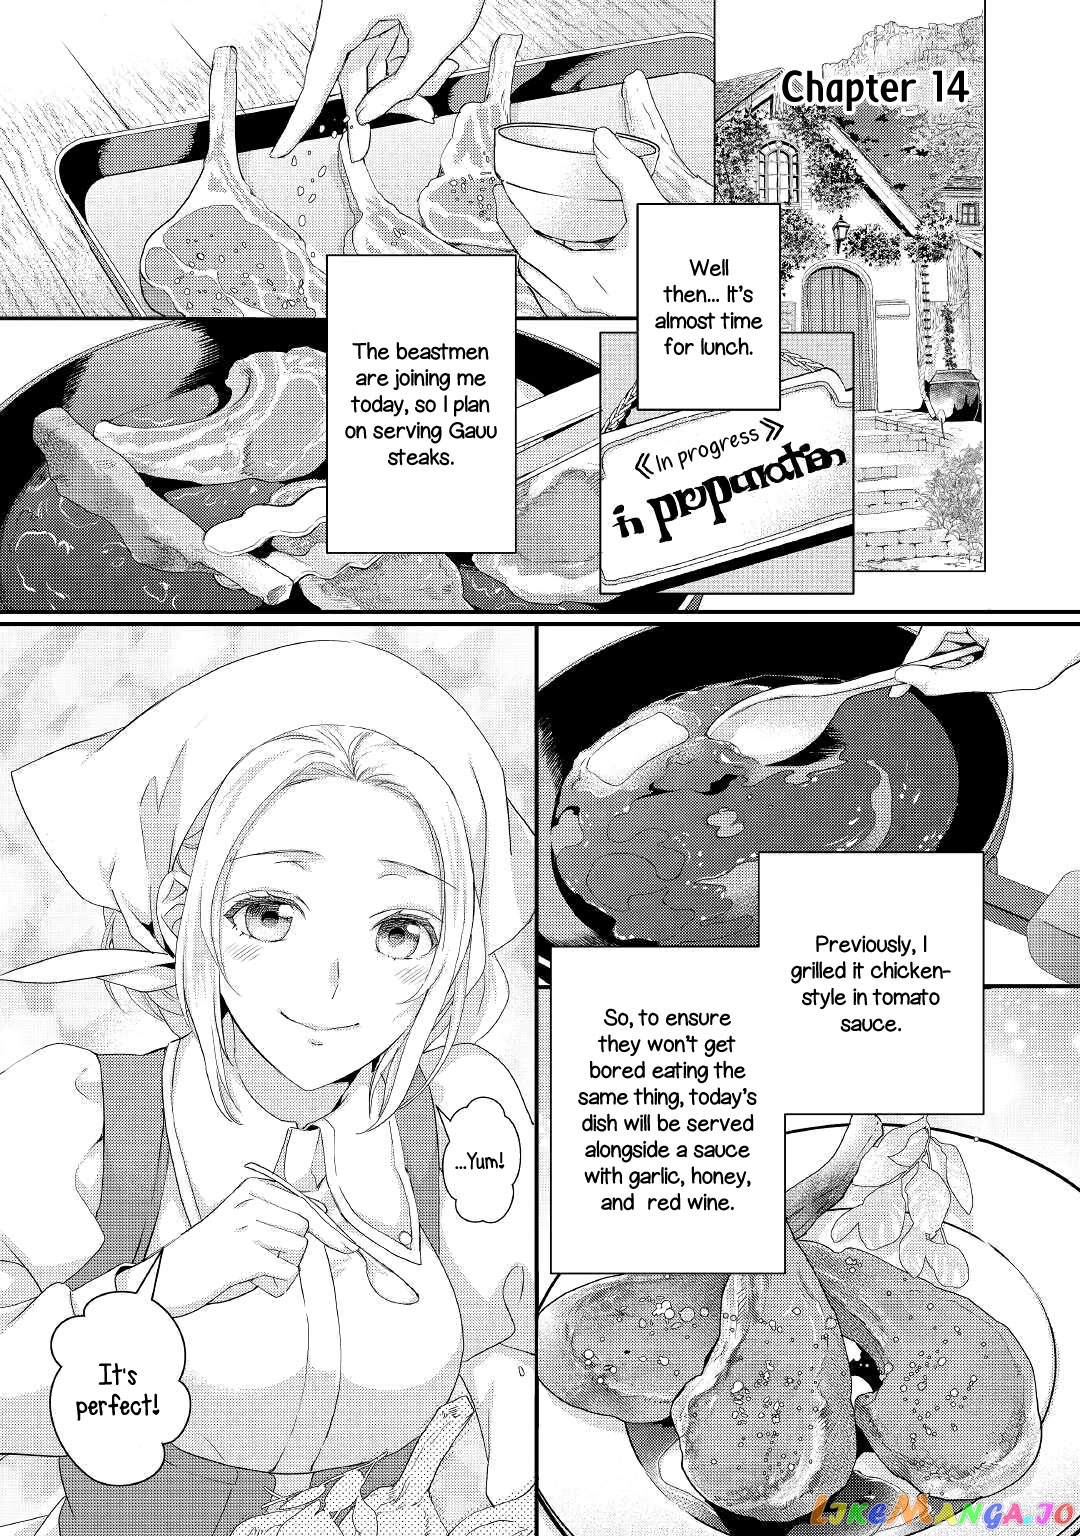 Milady Just Wants To Relax chapter 14 - page 2